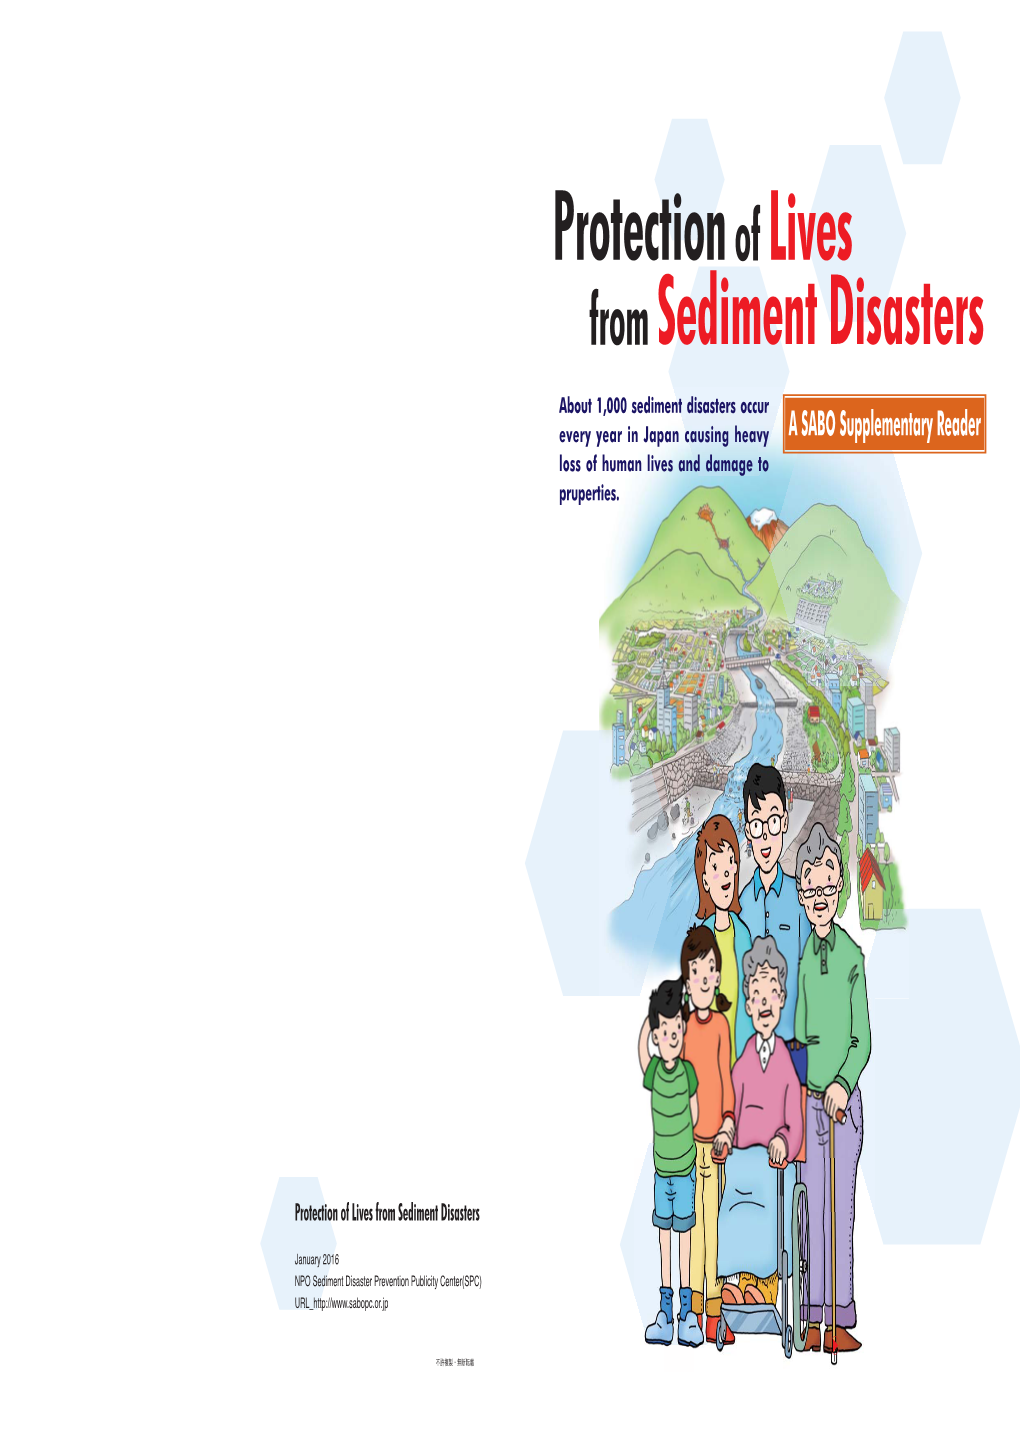 Protectionof Lives from Sediment Disasters